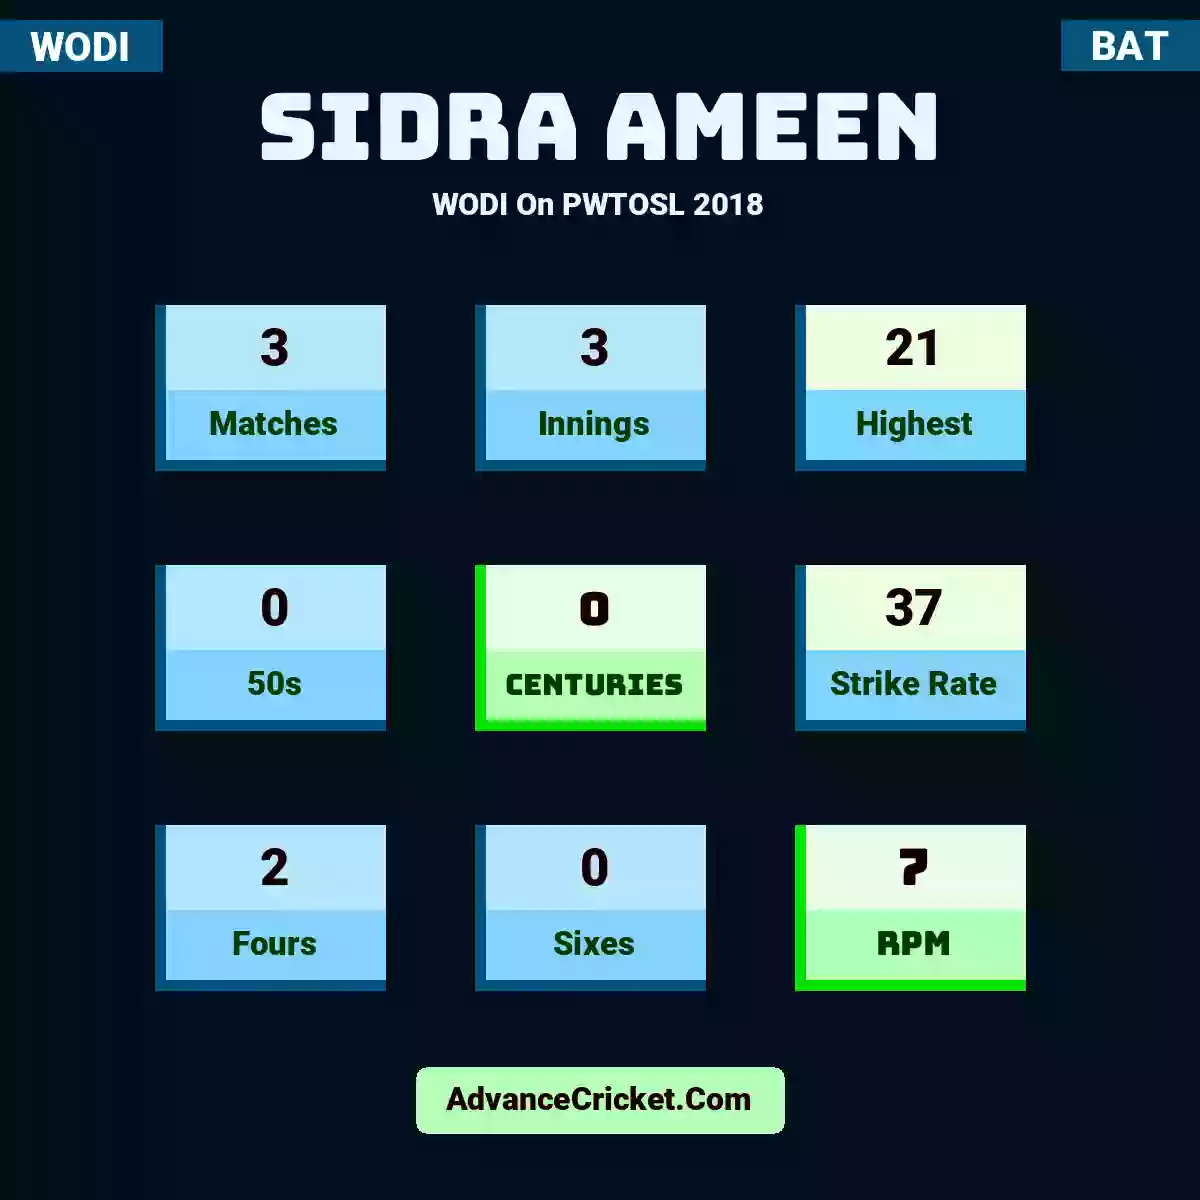 Sidra Ameen WODI  On PWTOSL 2018, Sidra Ameen played 3 matches, scored 21 runs as highest, 0 half-centuries, and 0 centuries, with a strike rate of 37. S.Ameen hit 2 fours and 0 sixes, with an RPM of 7.